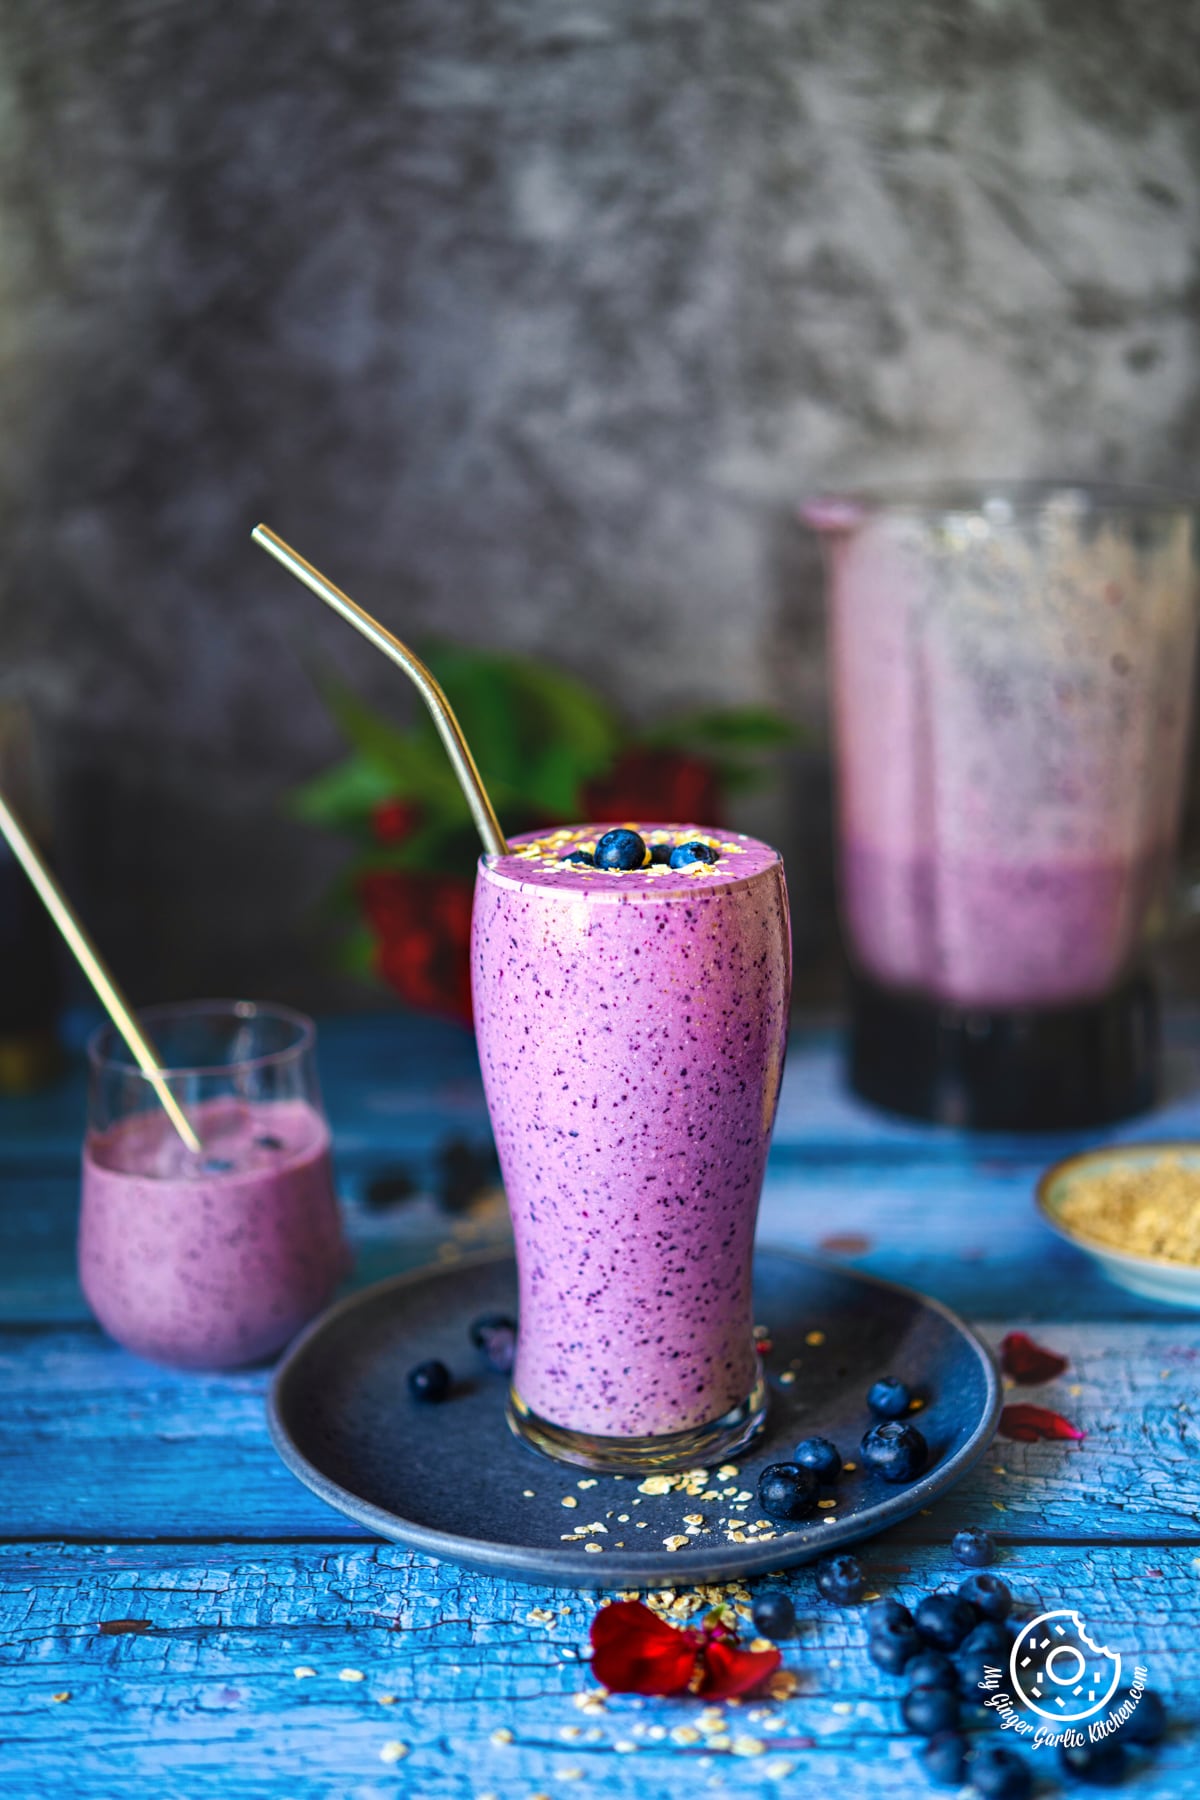 healthy breakfast blueberry pie smoothie glass topped with blueberries and oats with a glass in the background